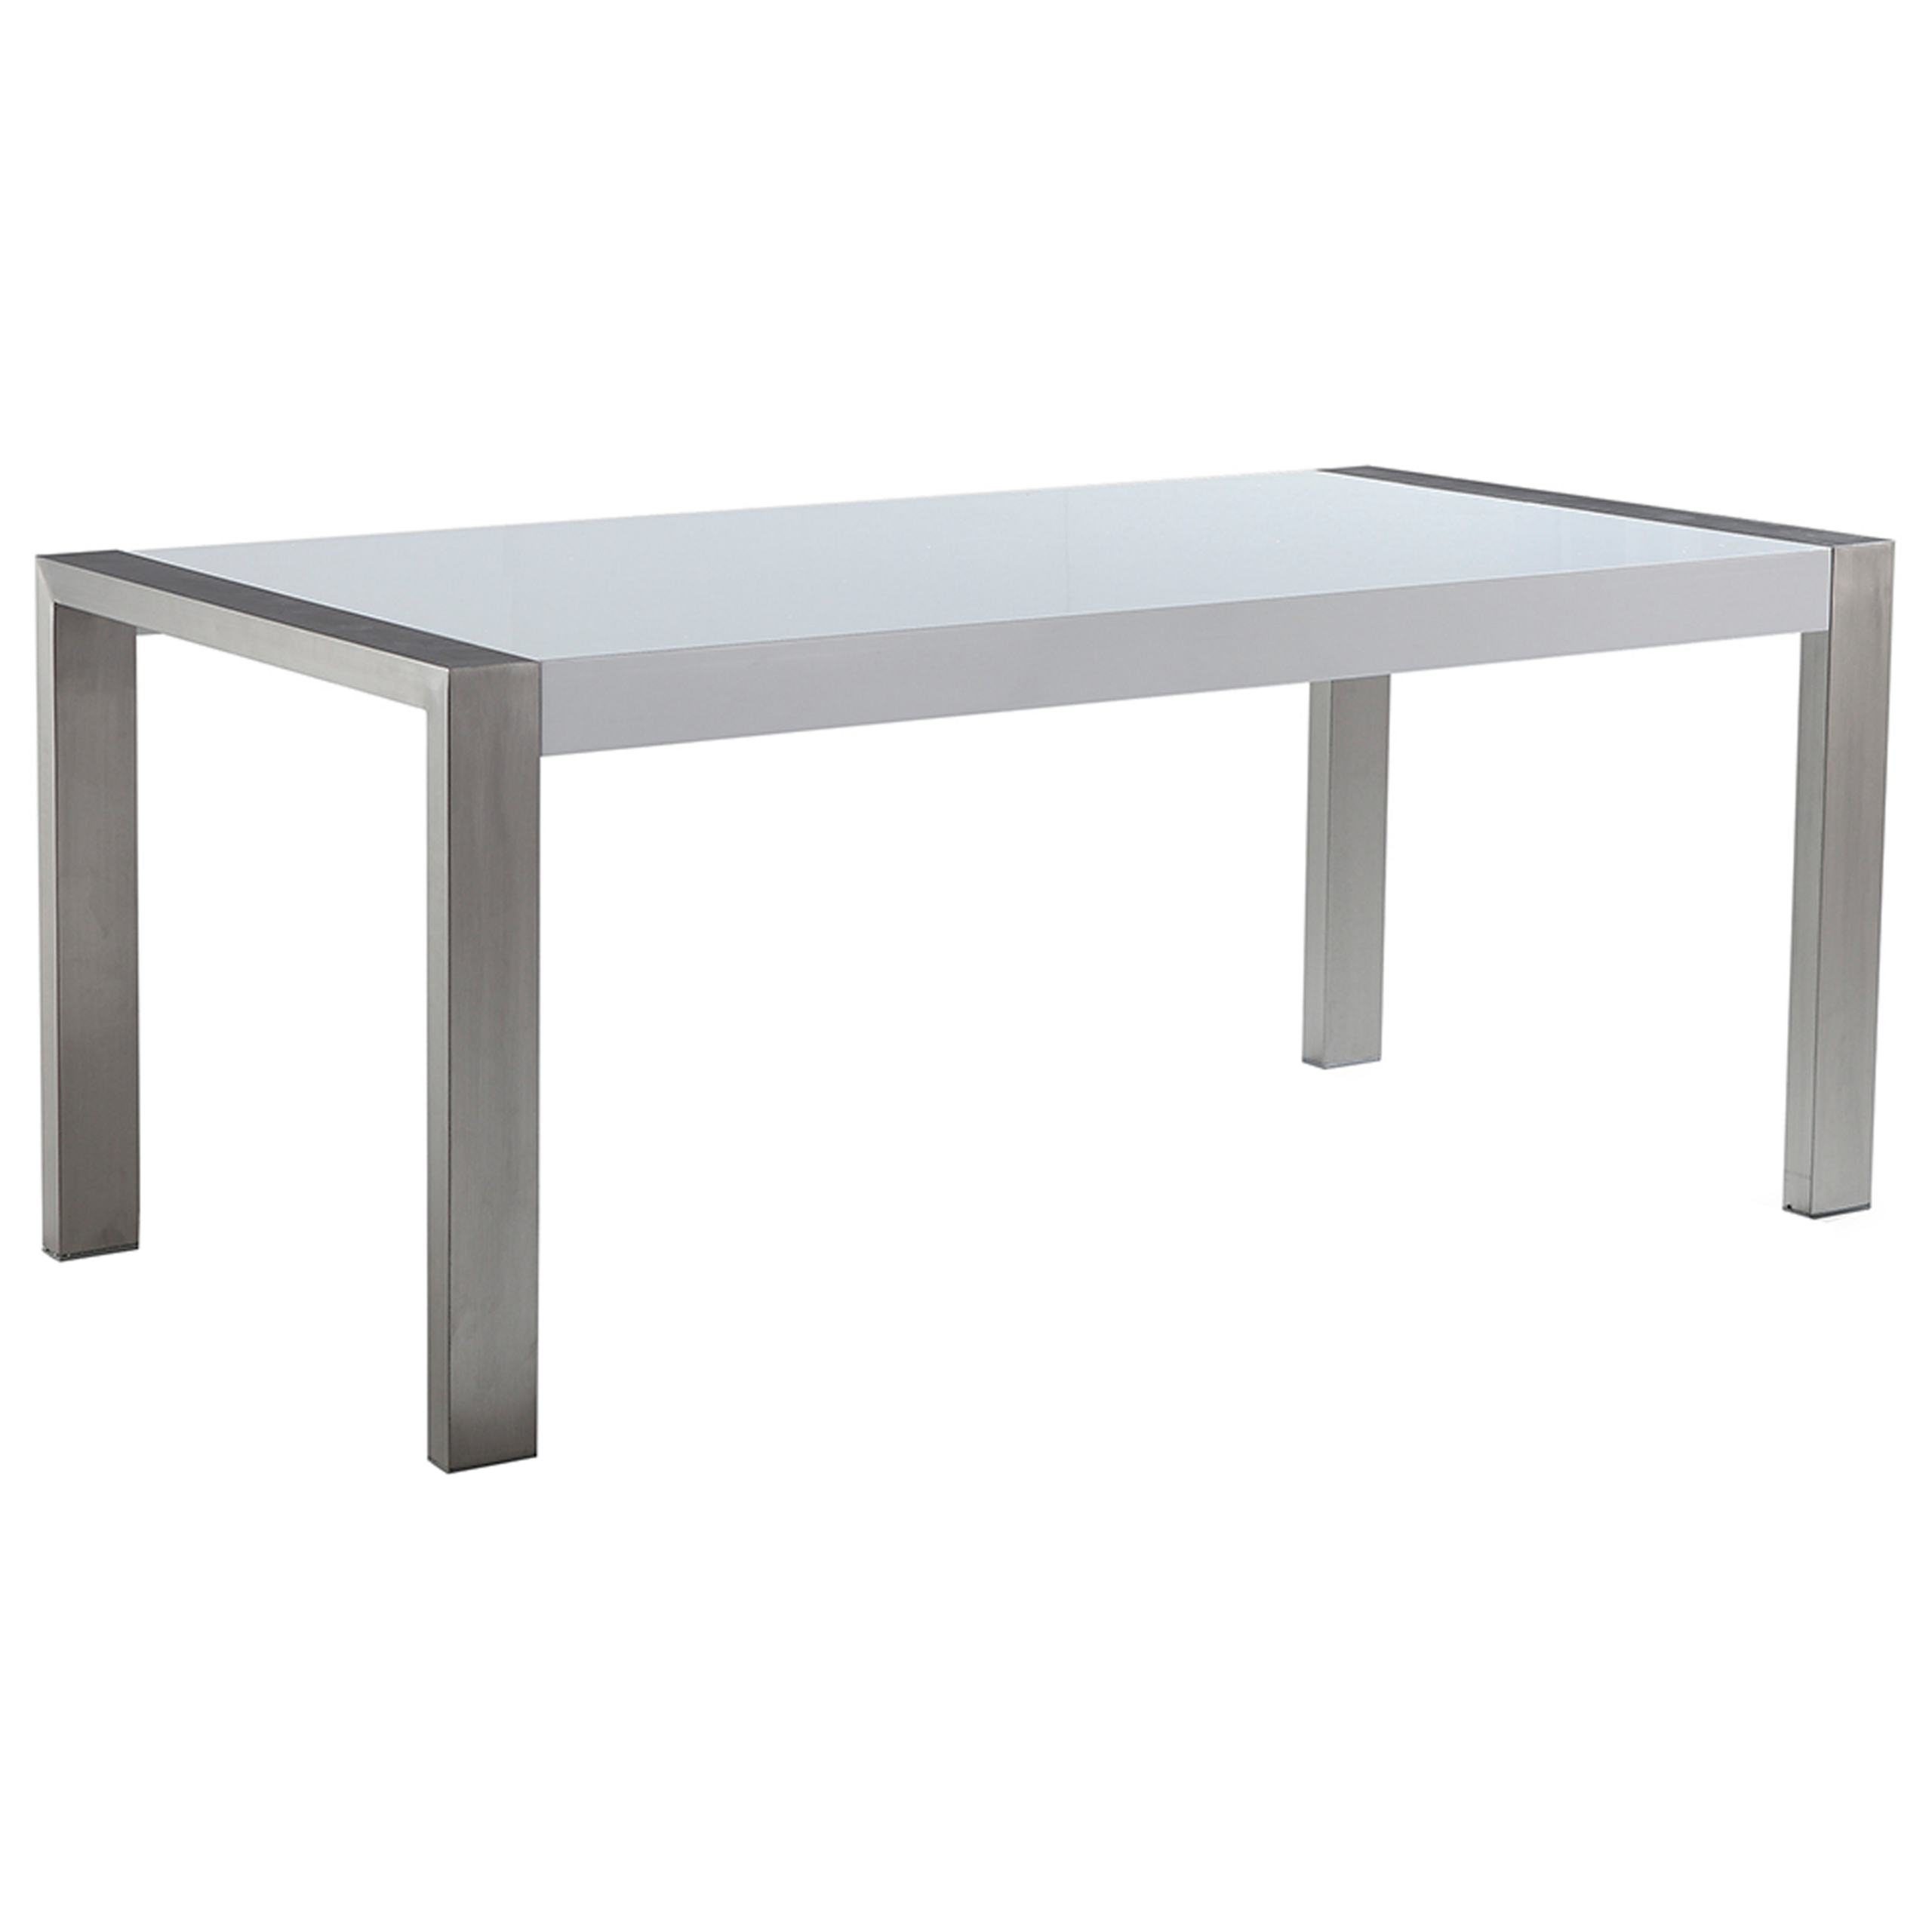 Photos - Dining Table Beliani Dining Room Table White with Silver Legs Stainless Steel 6 Seater 